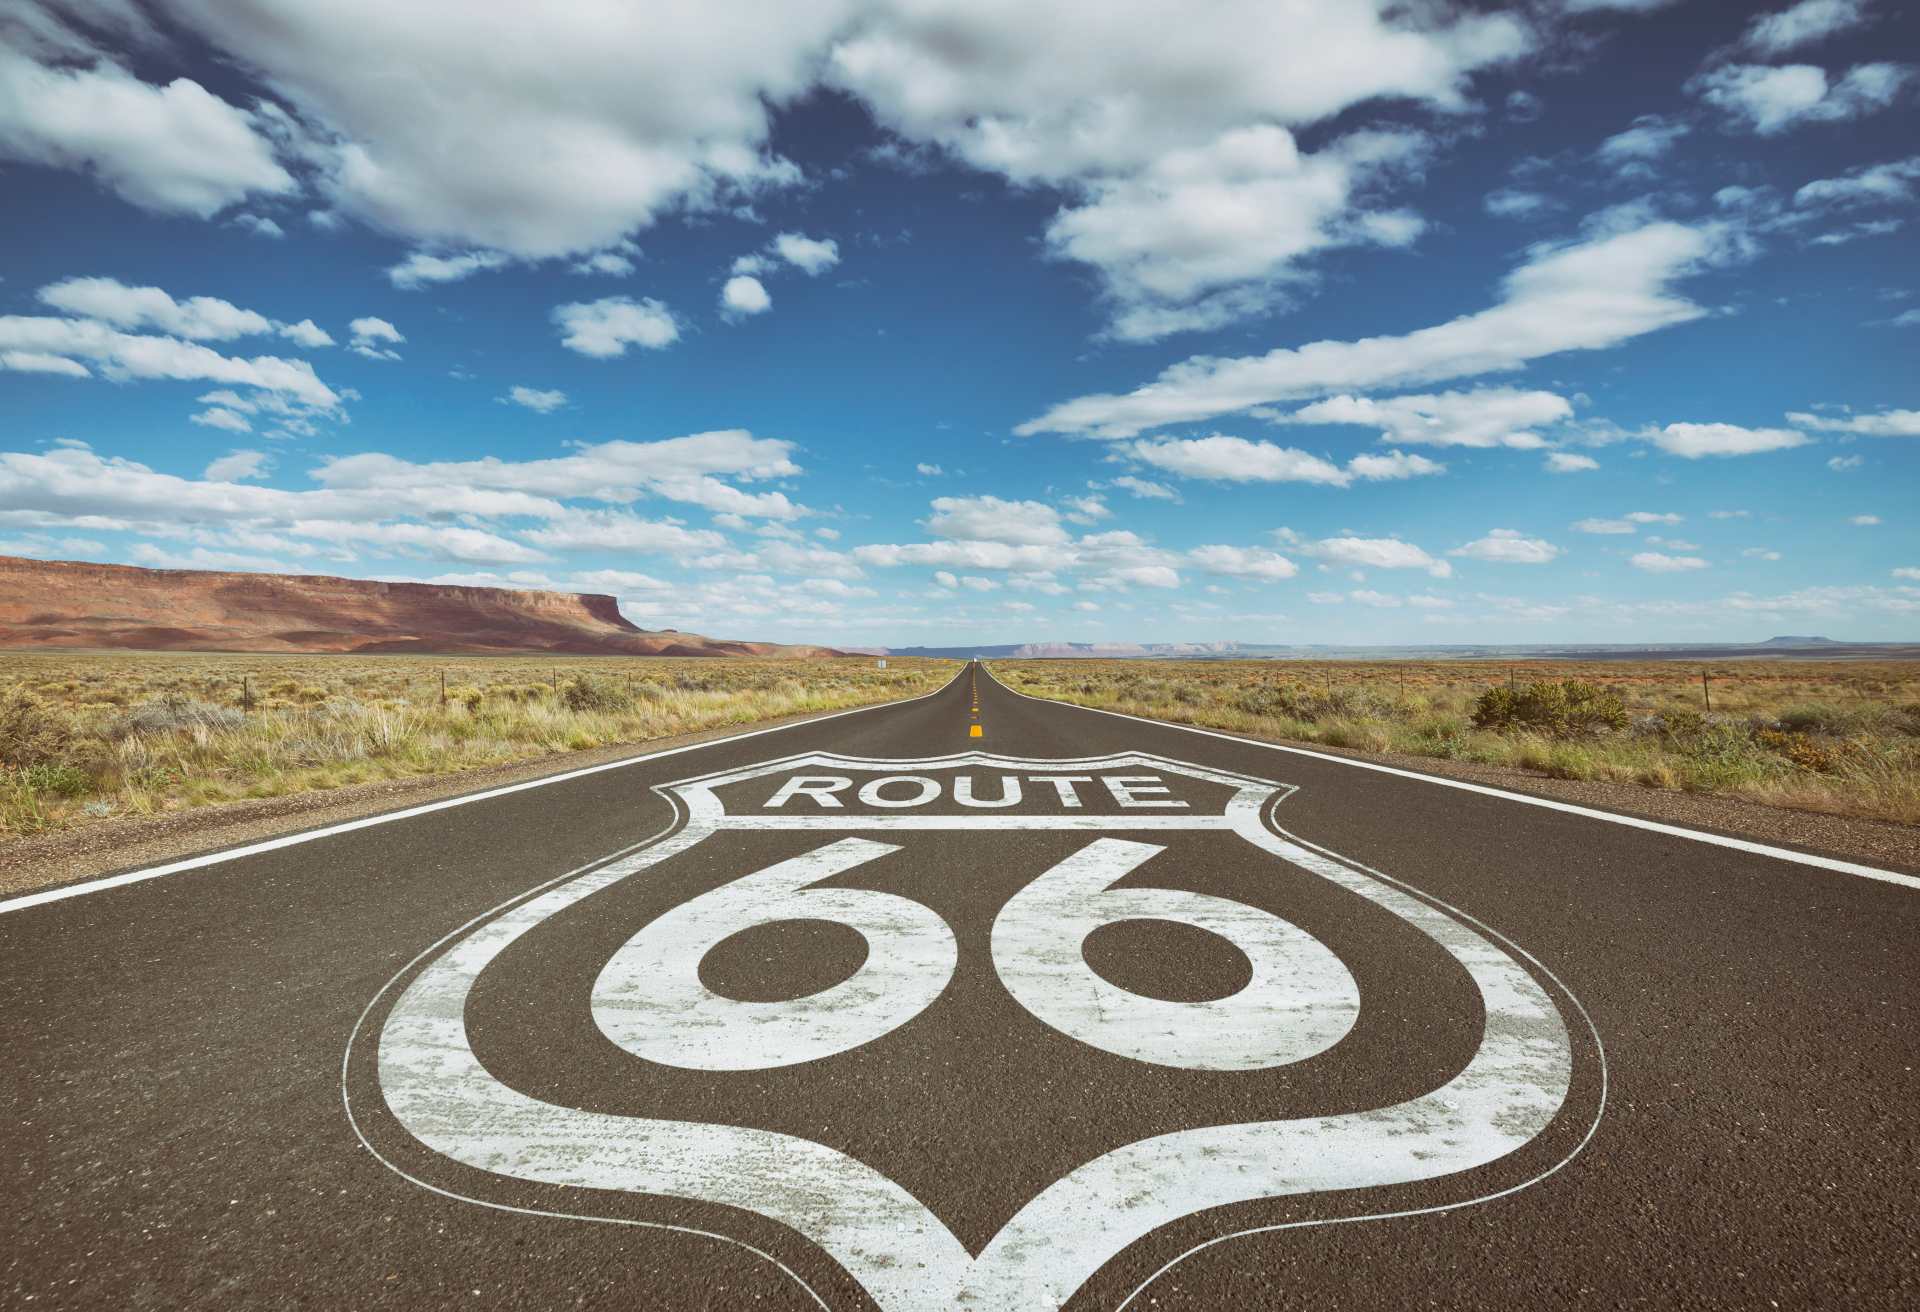 The Ultimate Route 66 Road Trip: From Illinois to California